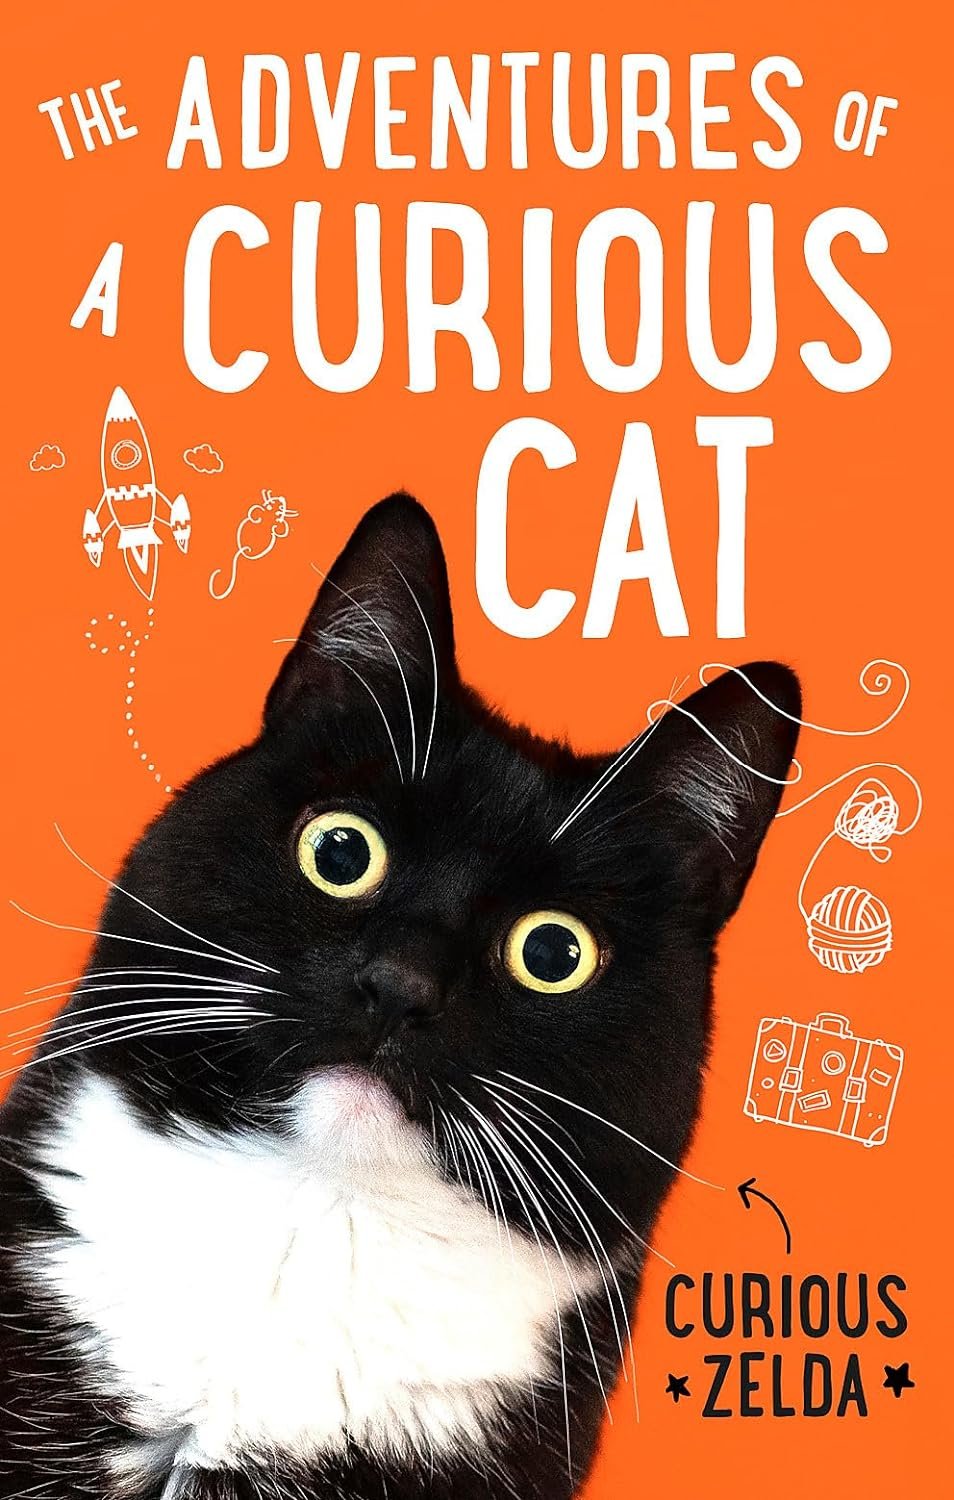 Book cover titled "The Adventures of a Curious Zelda: wit and wisdom from Curious Zelda, purrfect for cats and their humans," featuring a black cat with wide, bright eyes on an orange background, adorned with doodles such as a fish and a globe around it. By Curious Zelda.